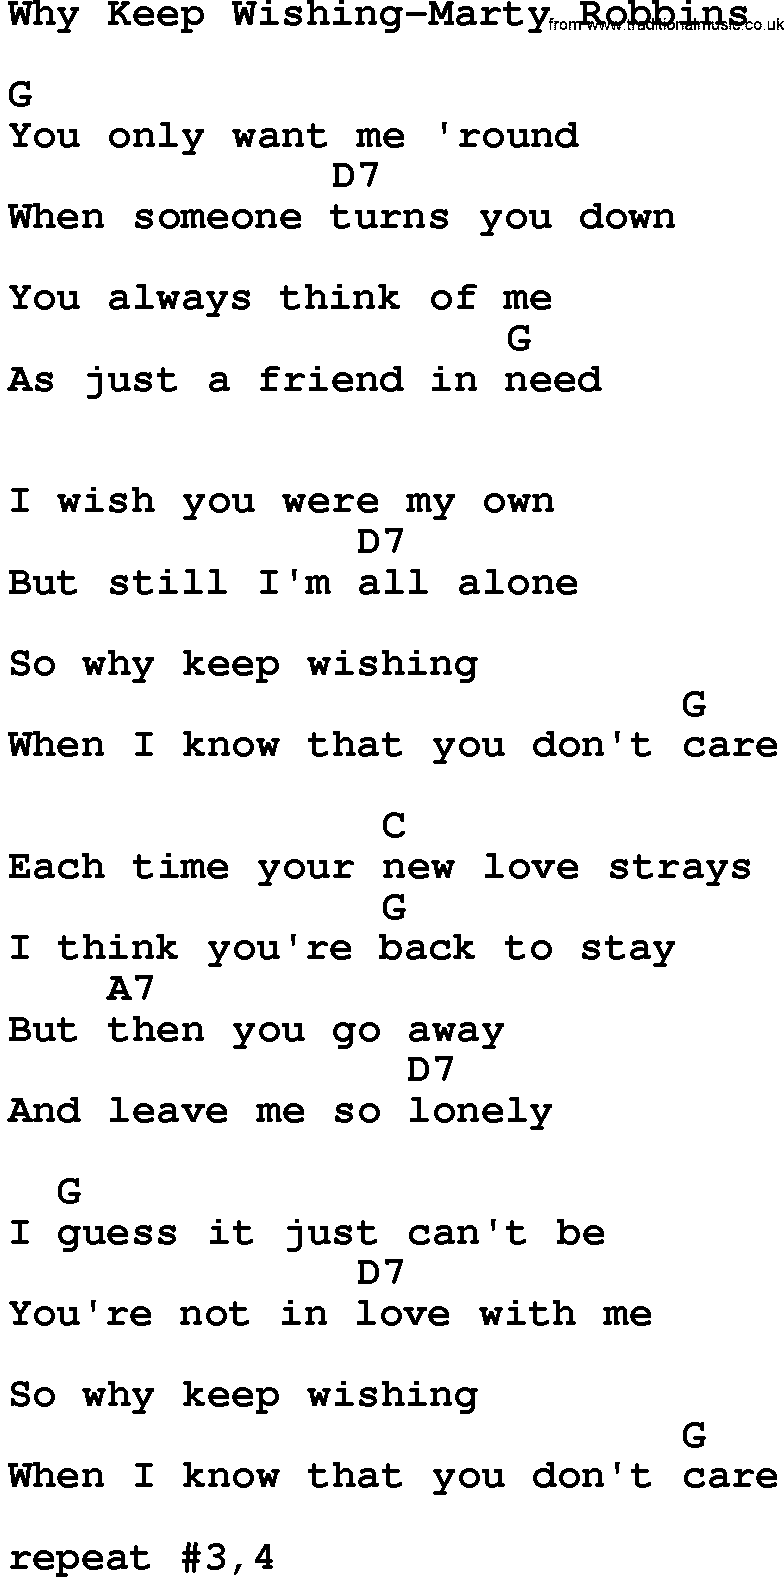 Country music song: Why Keep Wishing-Marty Robbins lyrics and chords